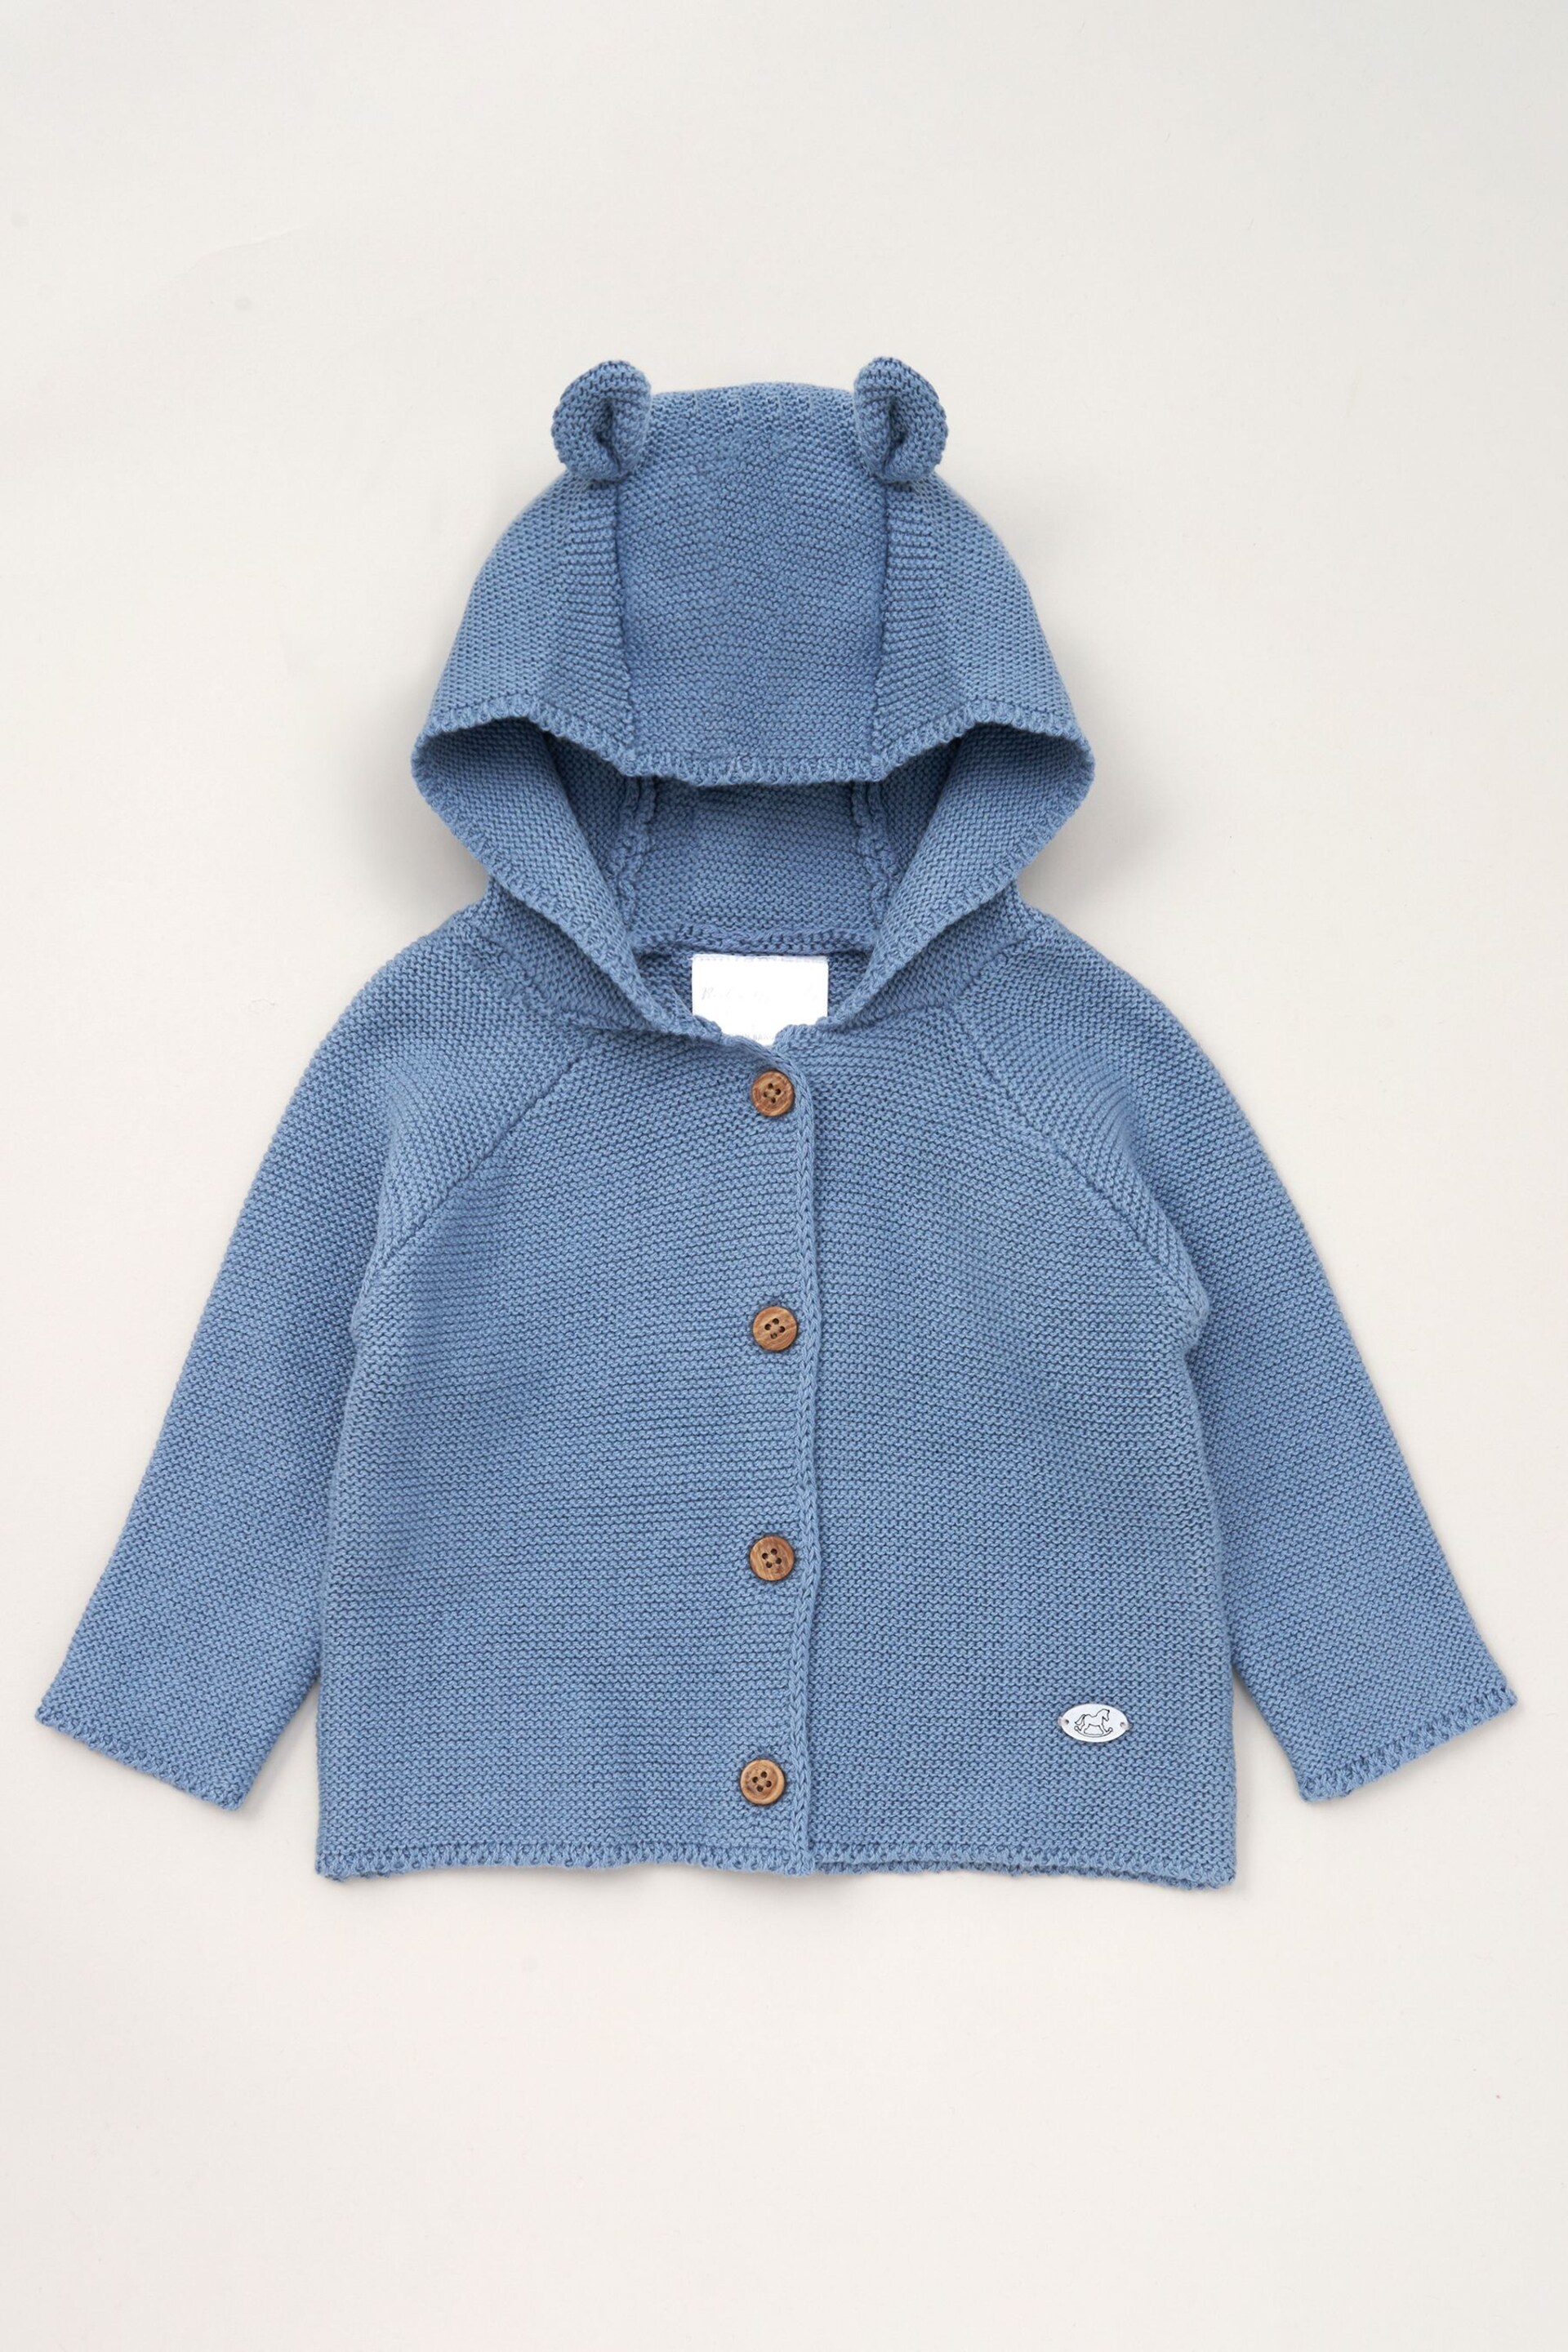 Rock-A-Bye Baby Blue Boutique Hooded Bear Cotton Knit Cardigan - Image 1 of 2